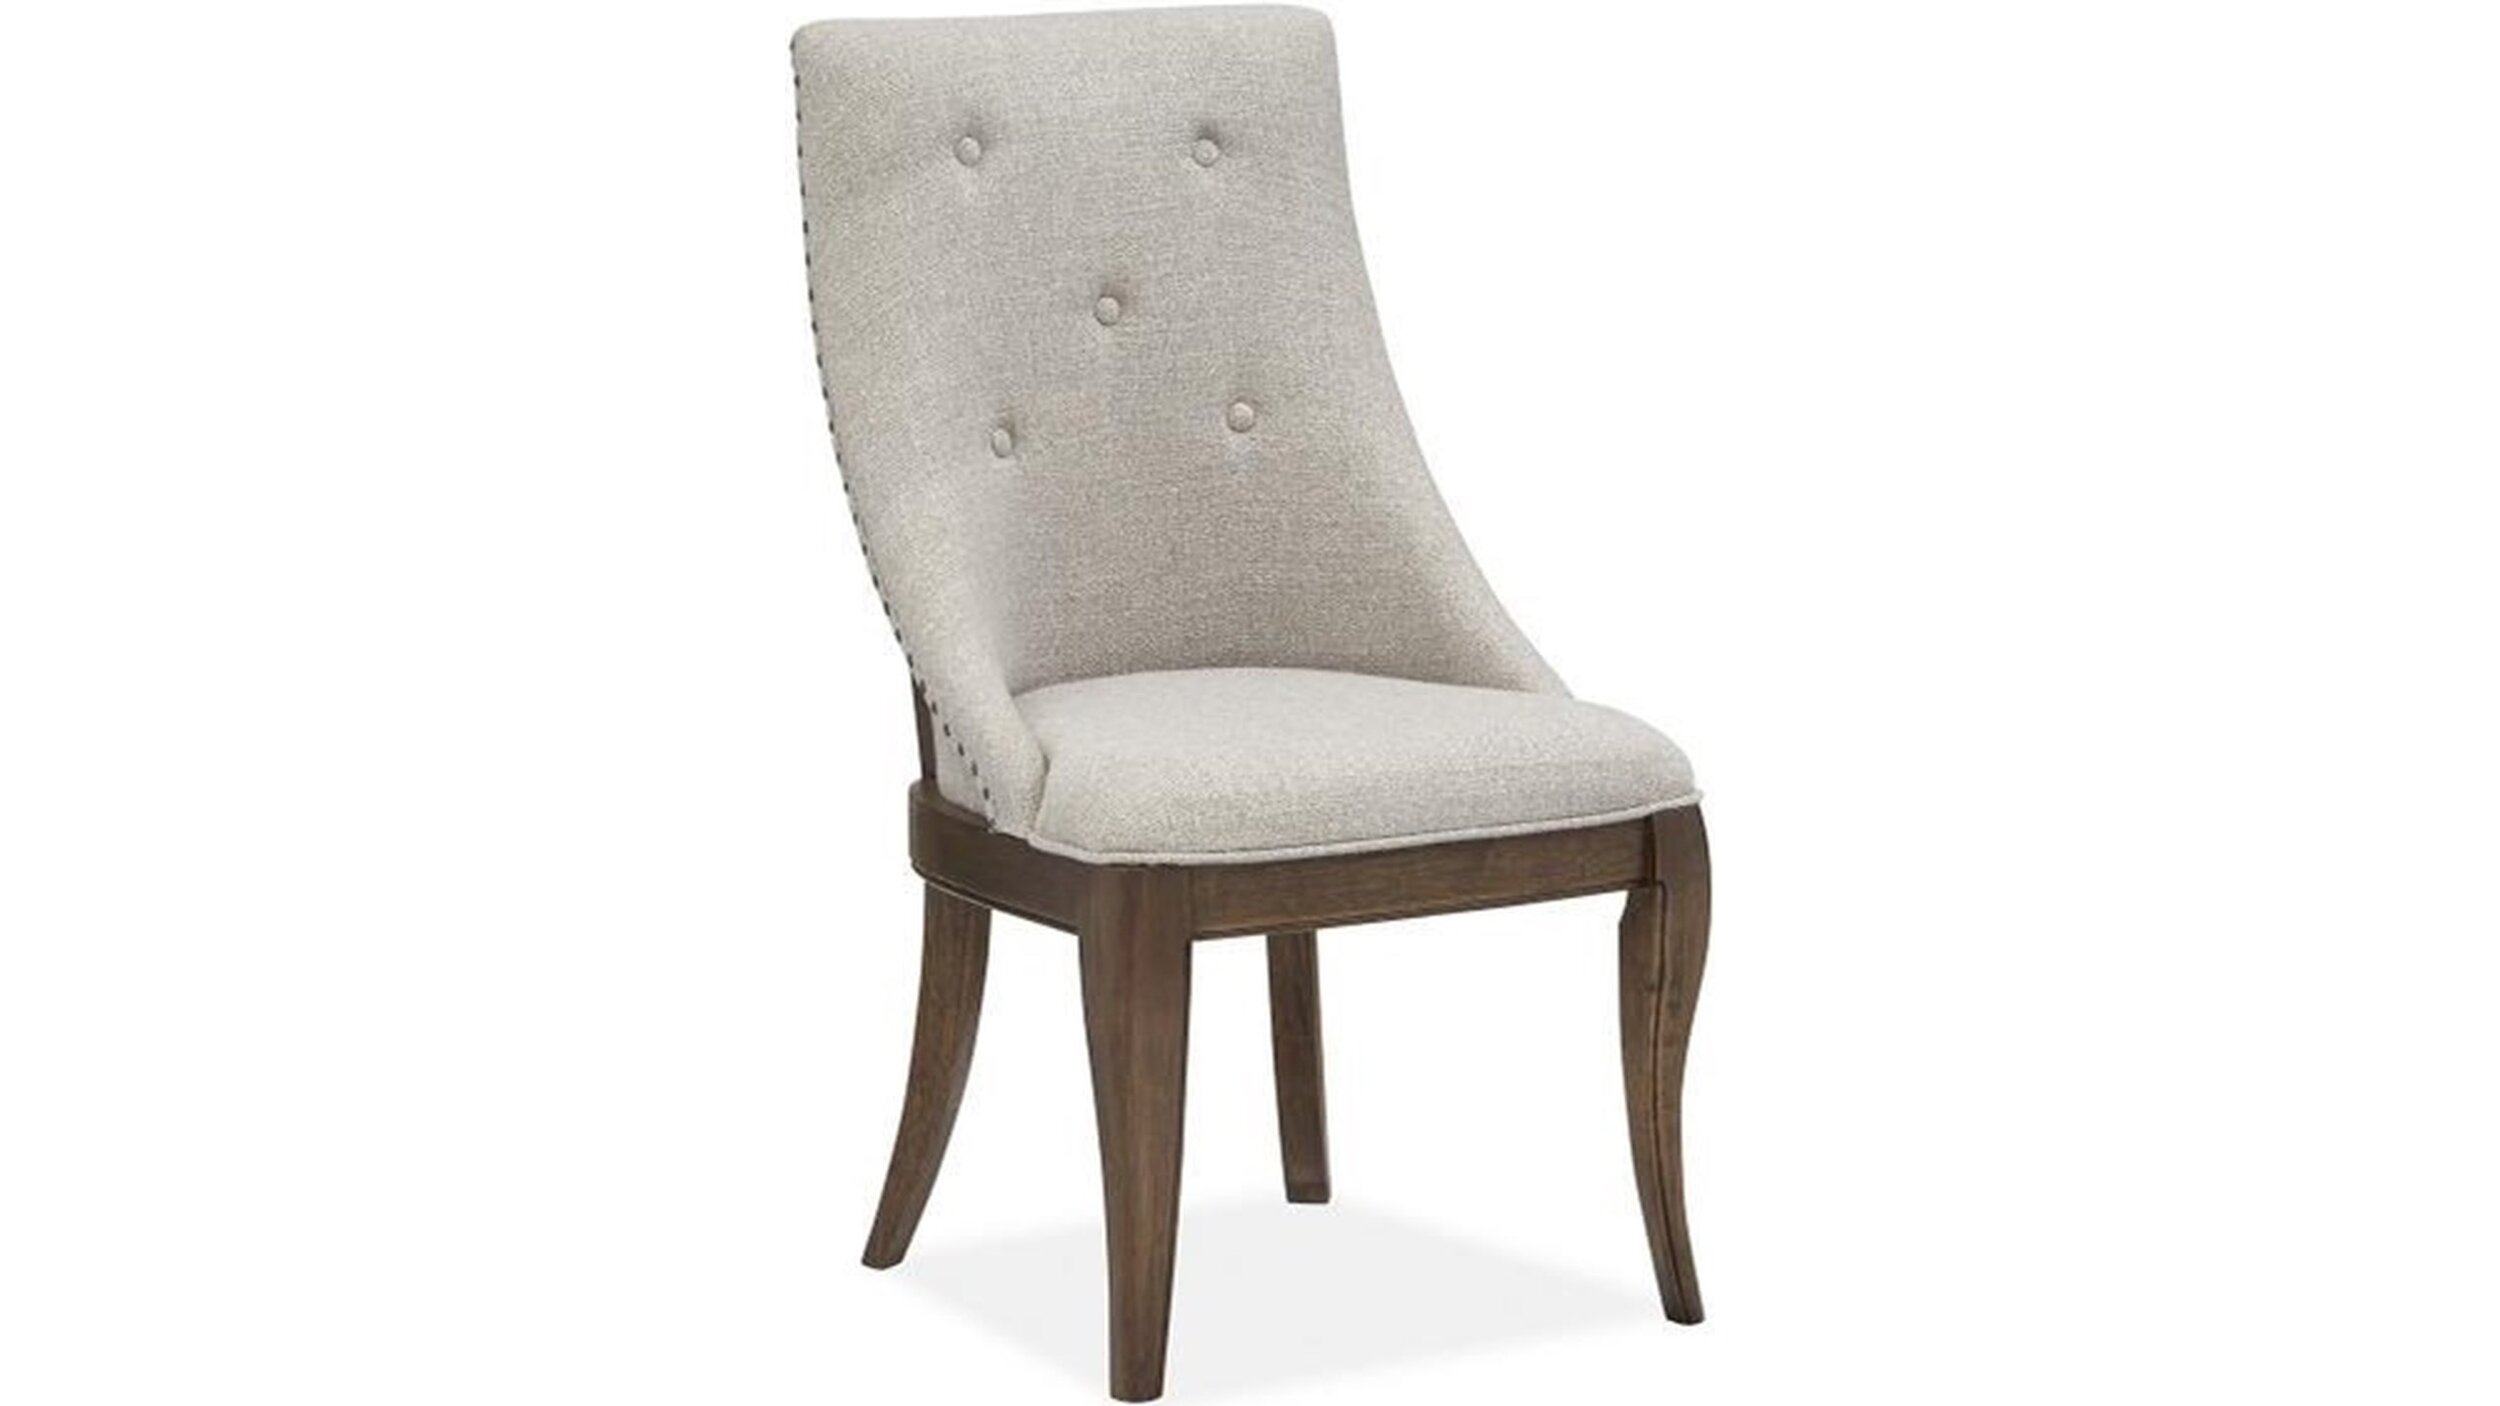 Withers Grove Dining Chair.jpg